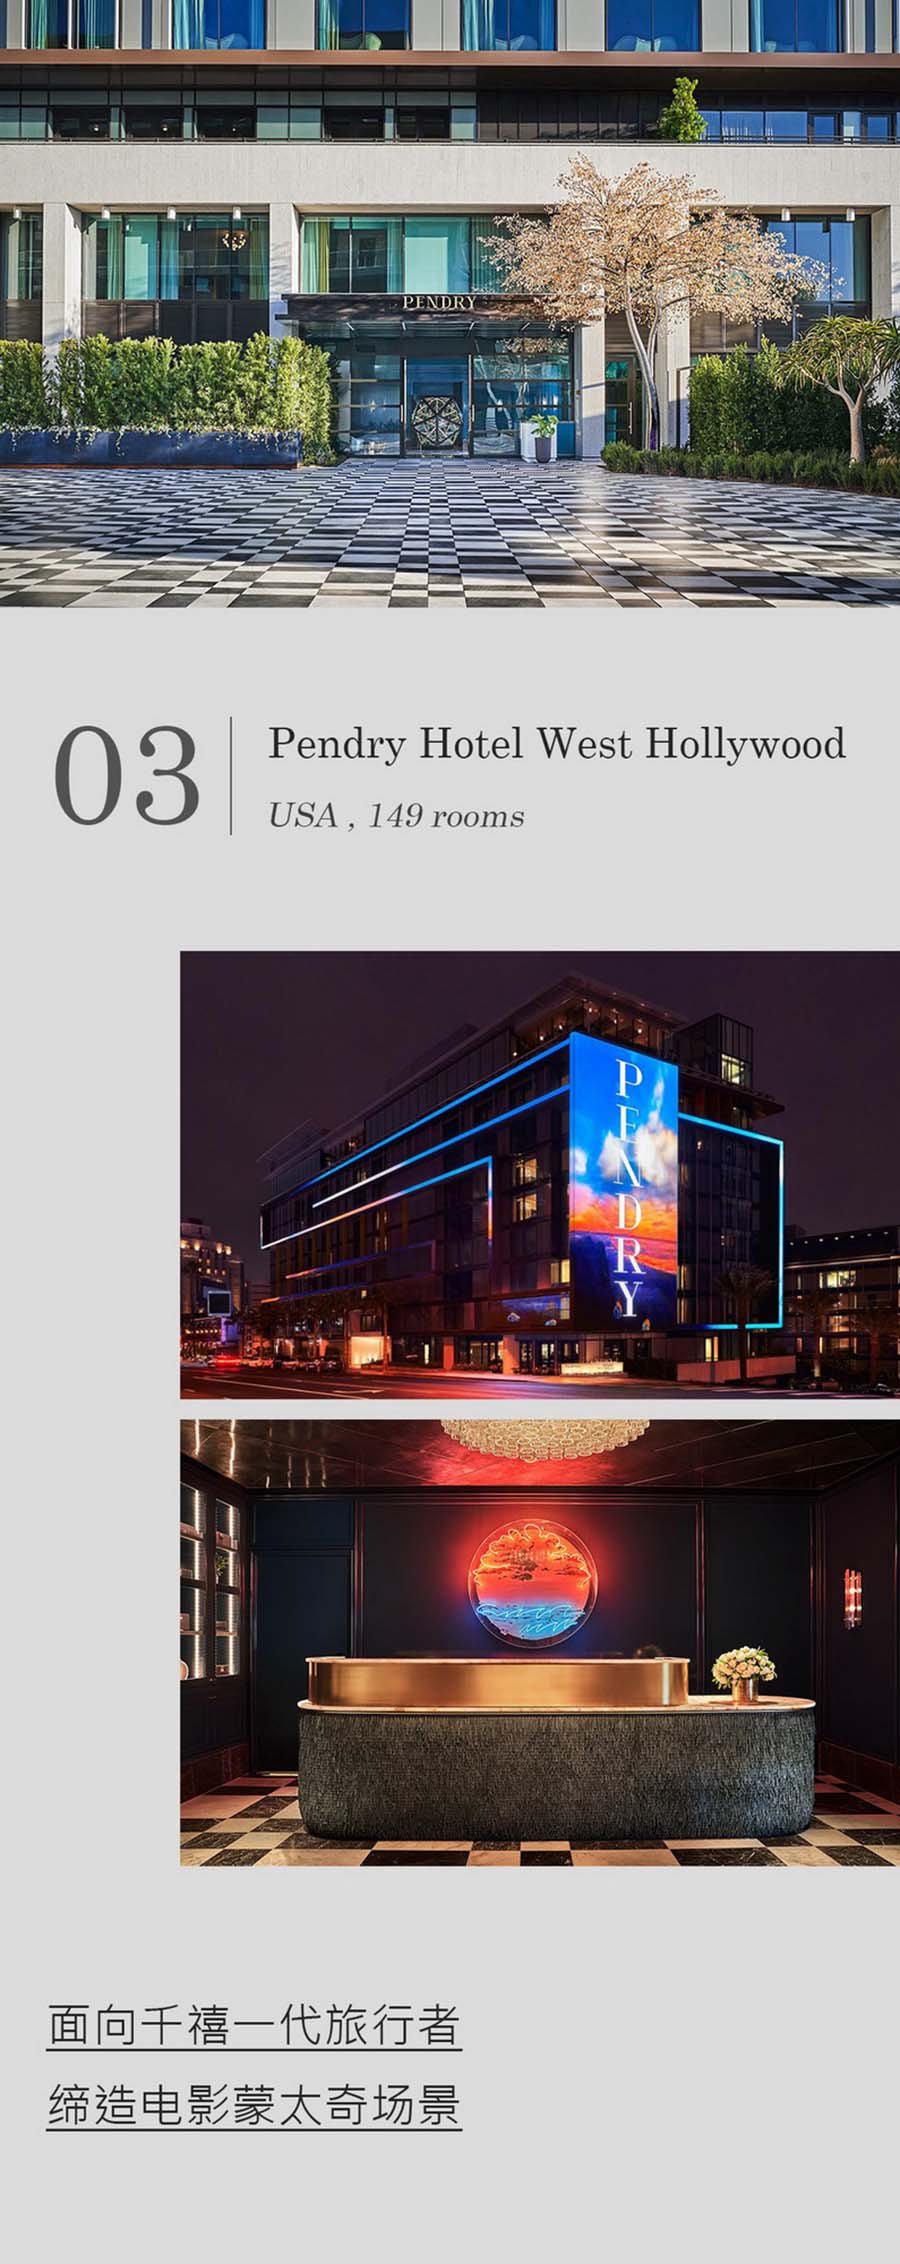 03 Pendry Hotel West Hollywood